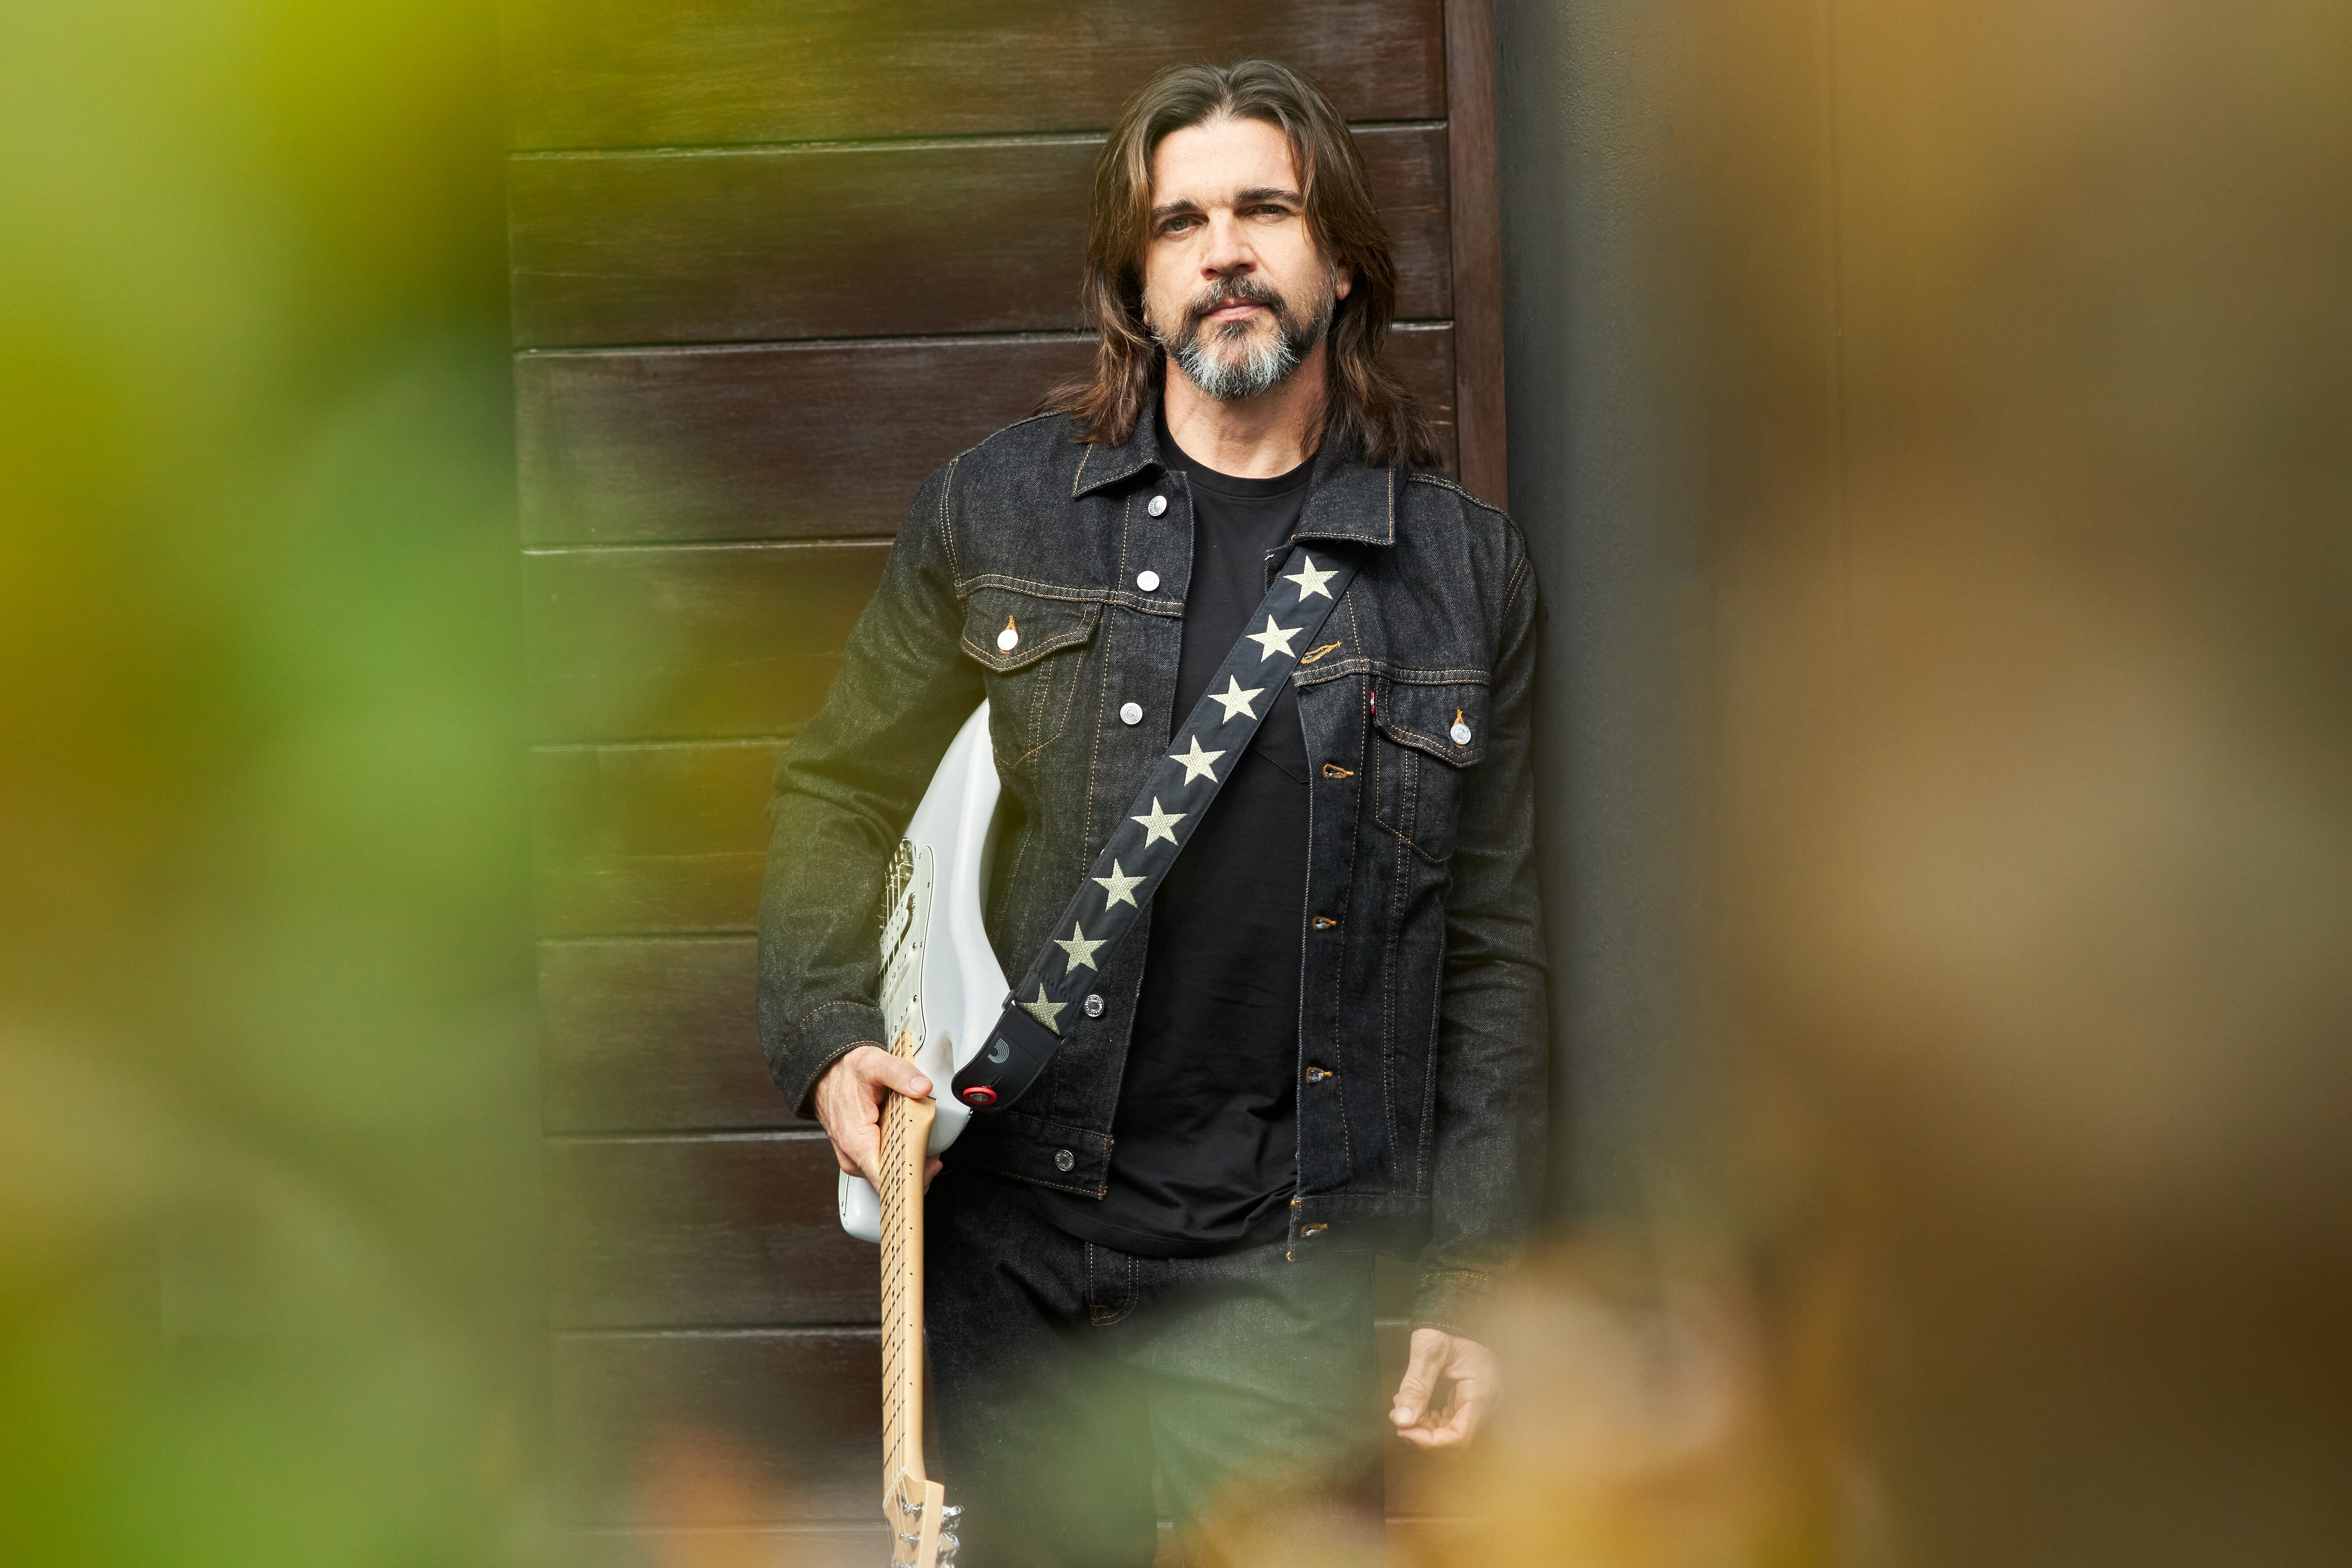 Guitar player with long hair, a mustache and black leather jacket leans against a wall with his white guitar slung around him.